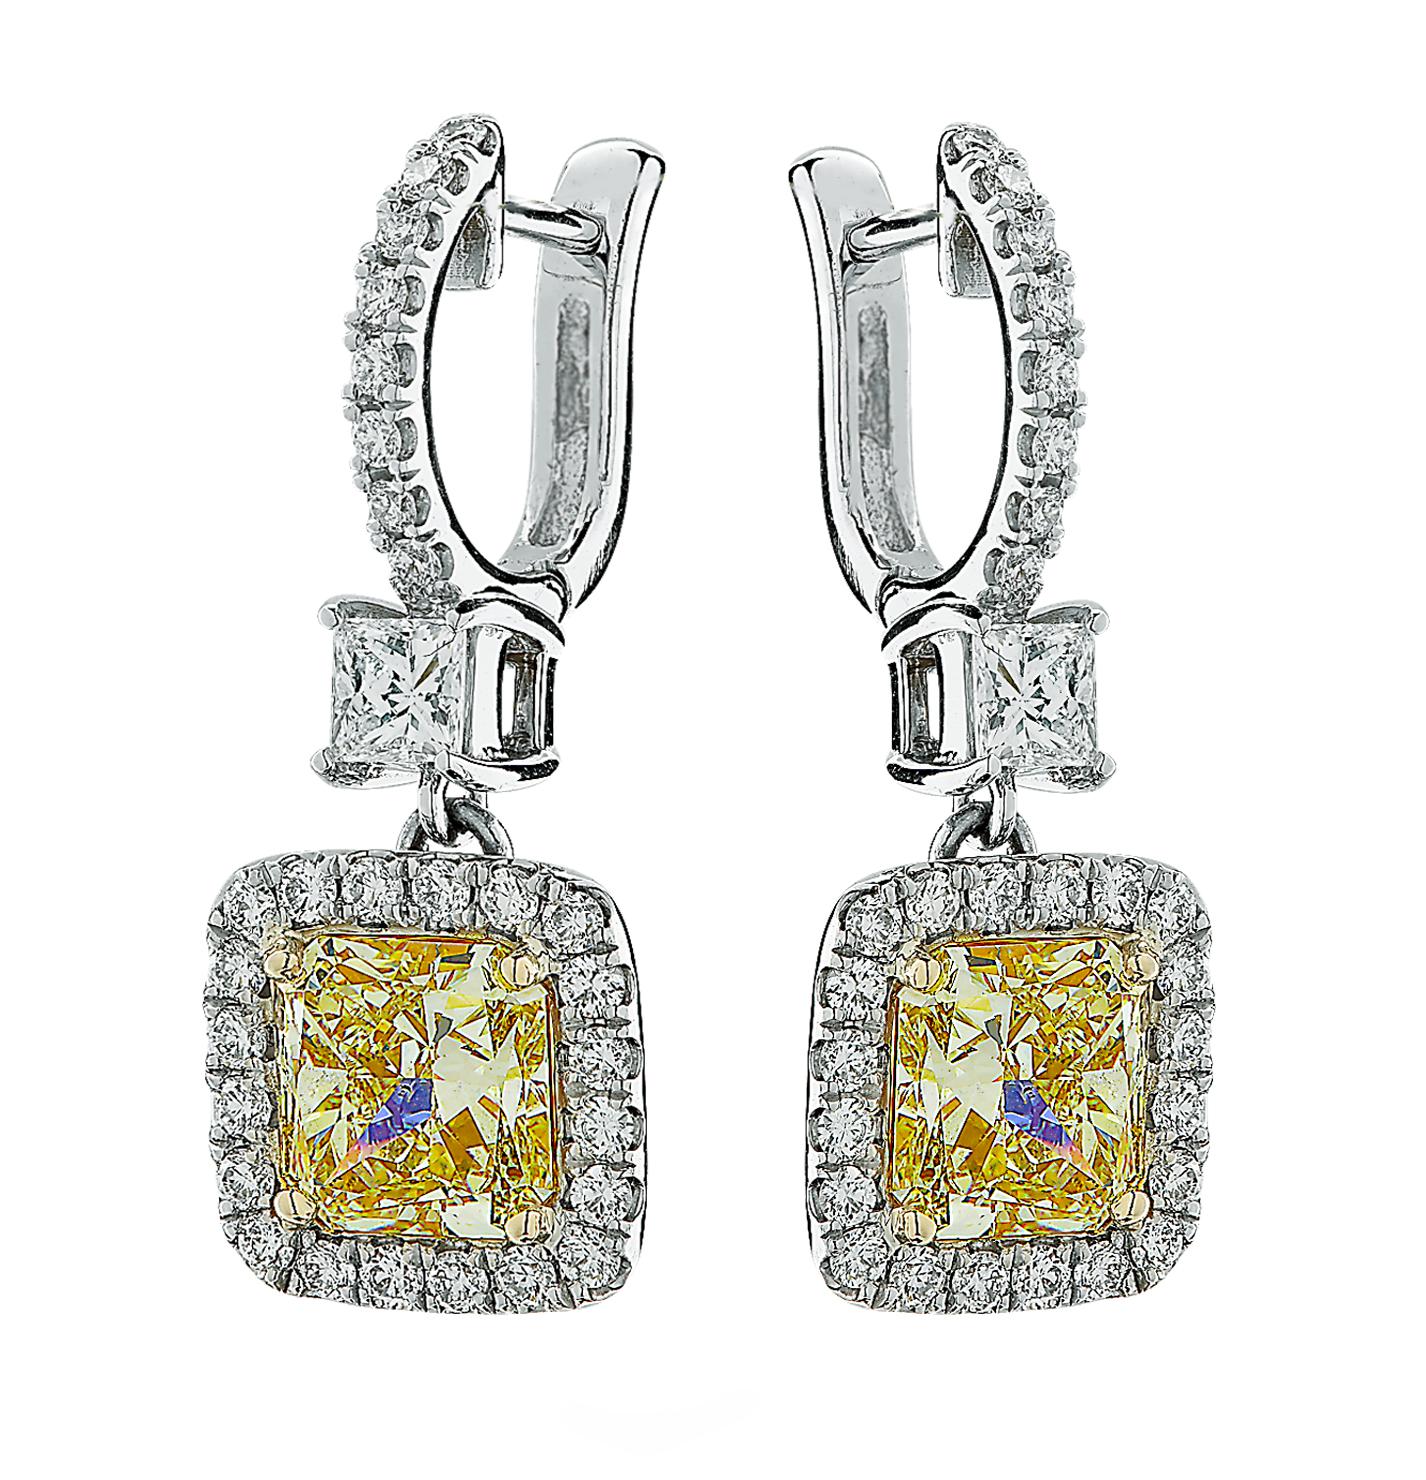 Exquisite Vivid Diamonds dangle earrings crafted in 18 karat yellow and white gold, showcasing two perfectly matched GIA certified Radiant Cut diamonds, one weighing 3.20 carats, W-Z color, VS2 clarity and one weighing 3.01 carats, W-Z color, SI1